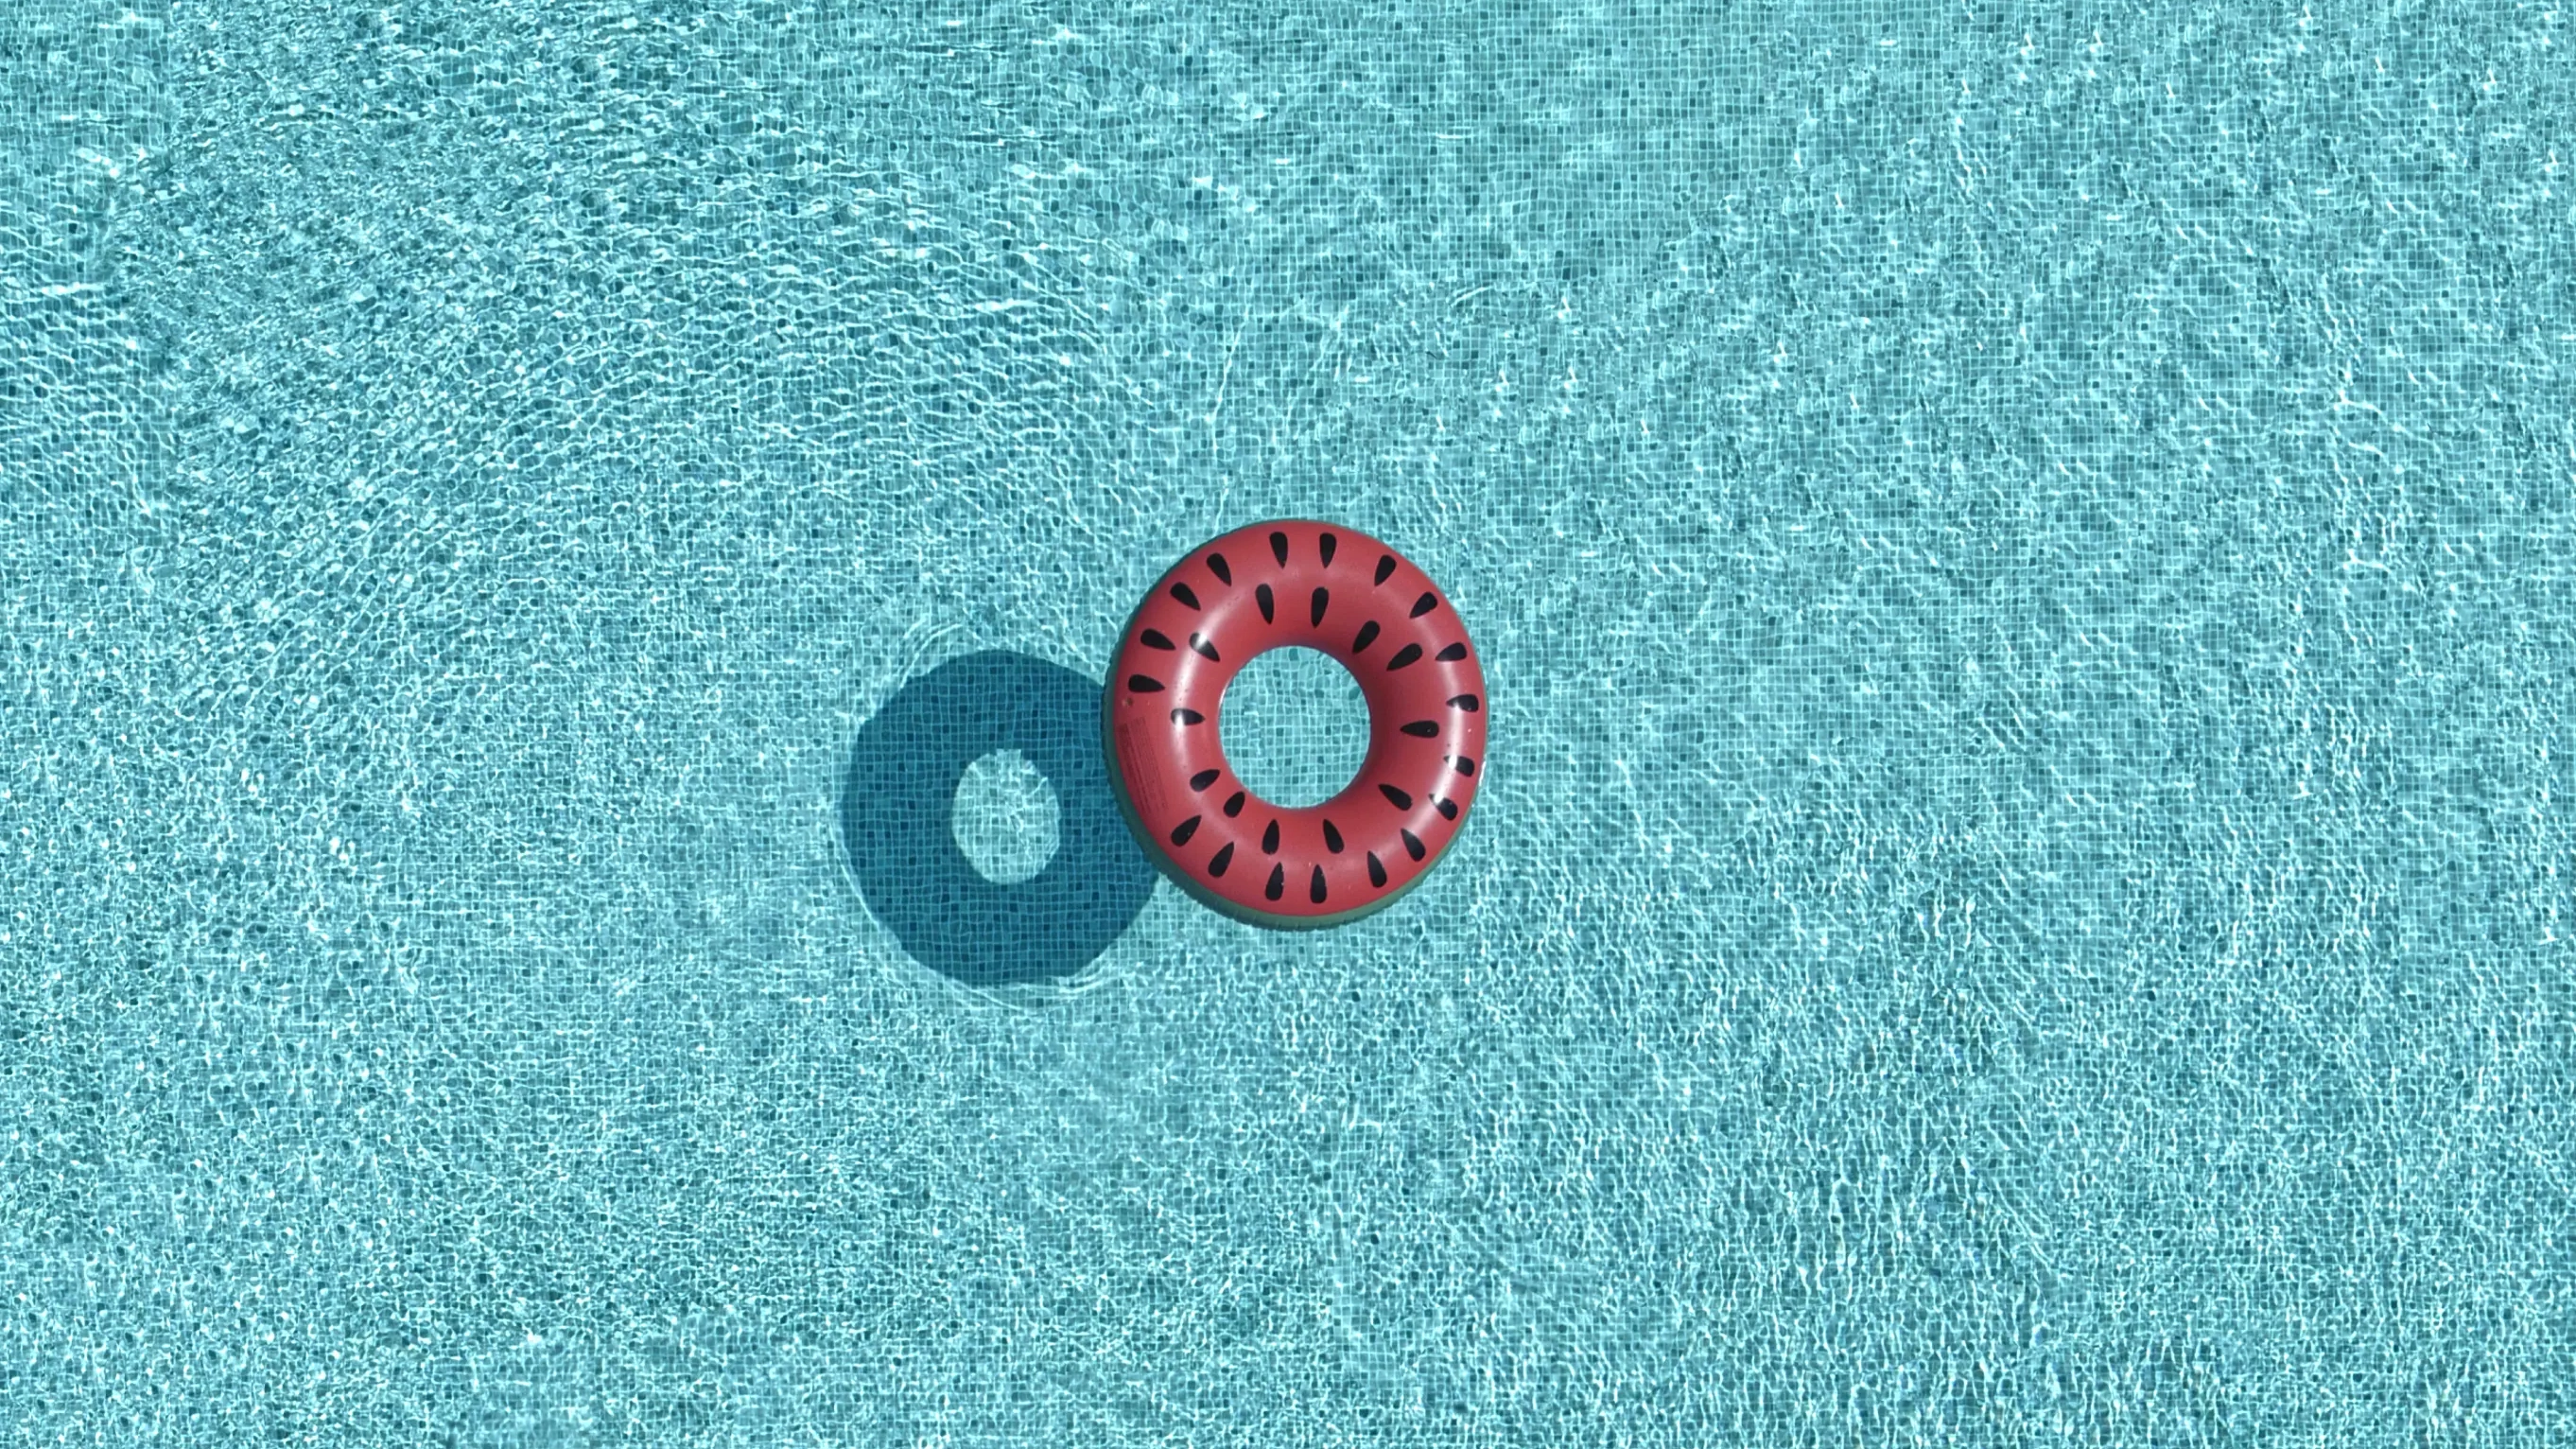 General 2724x1532 swimming pool water photography floating simple background shadow minimalism